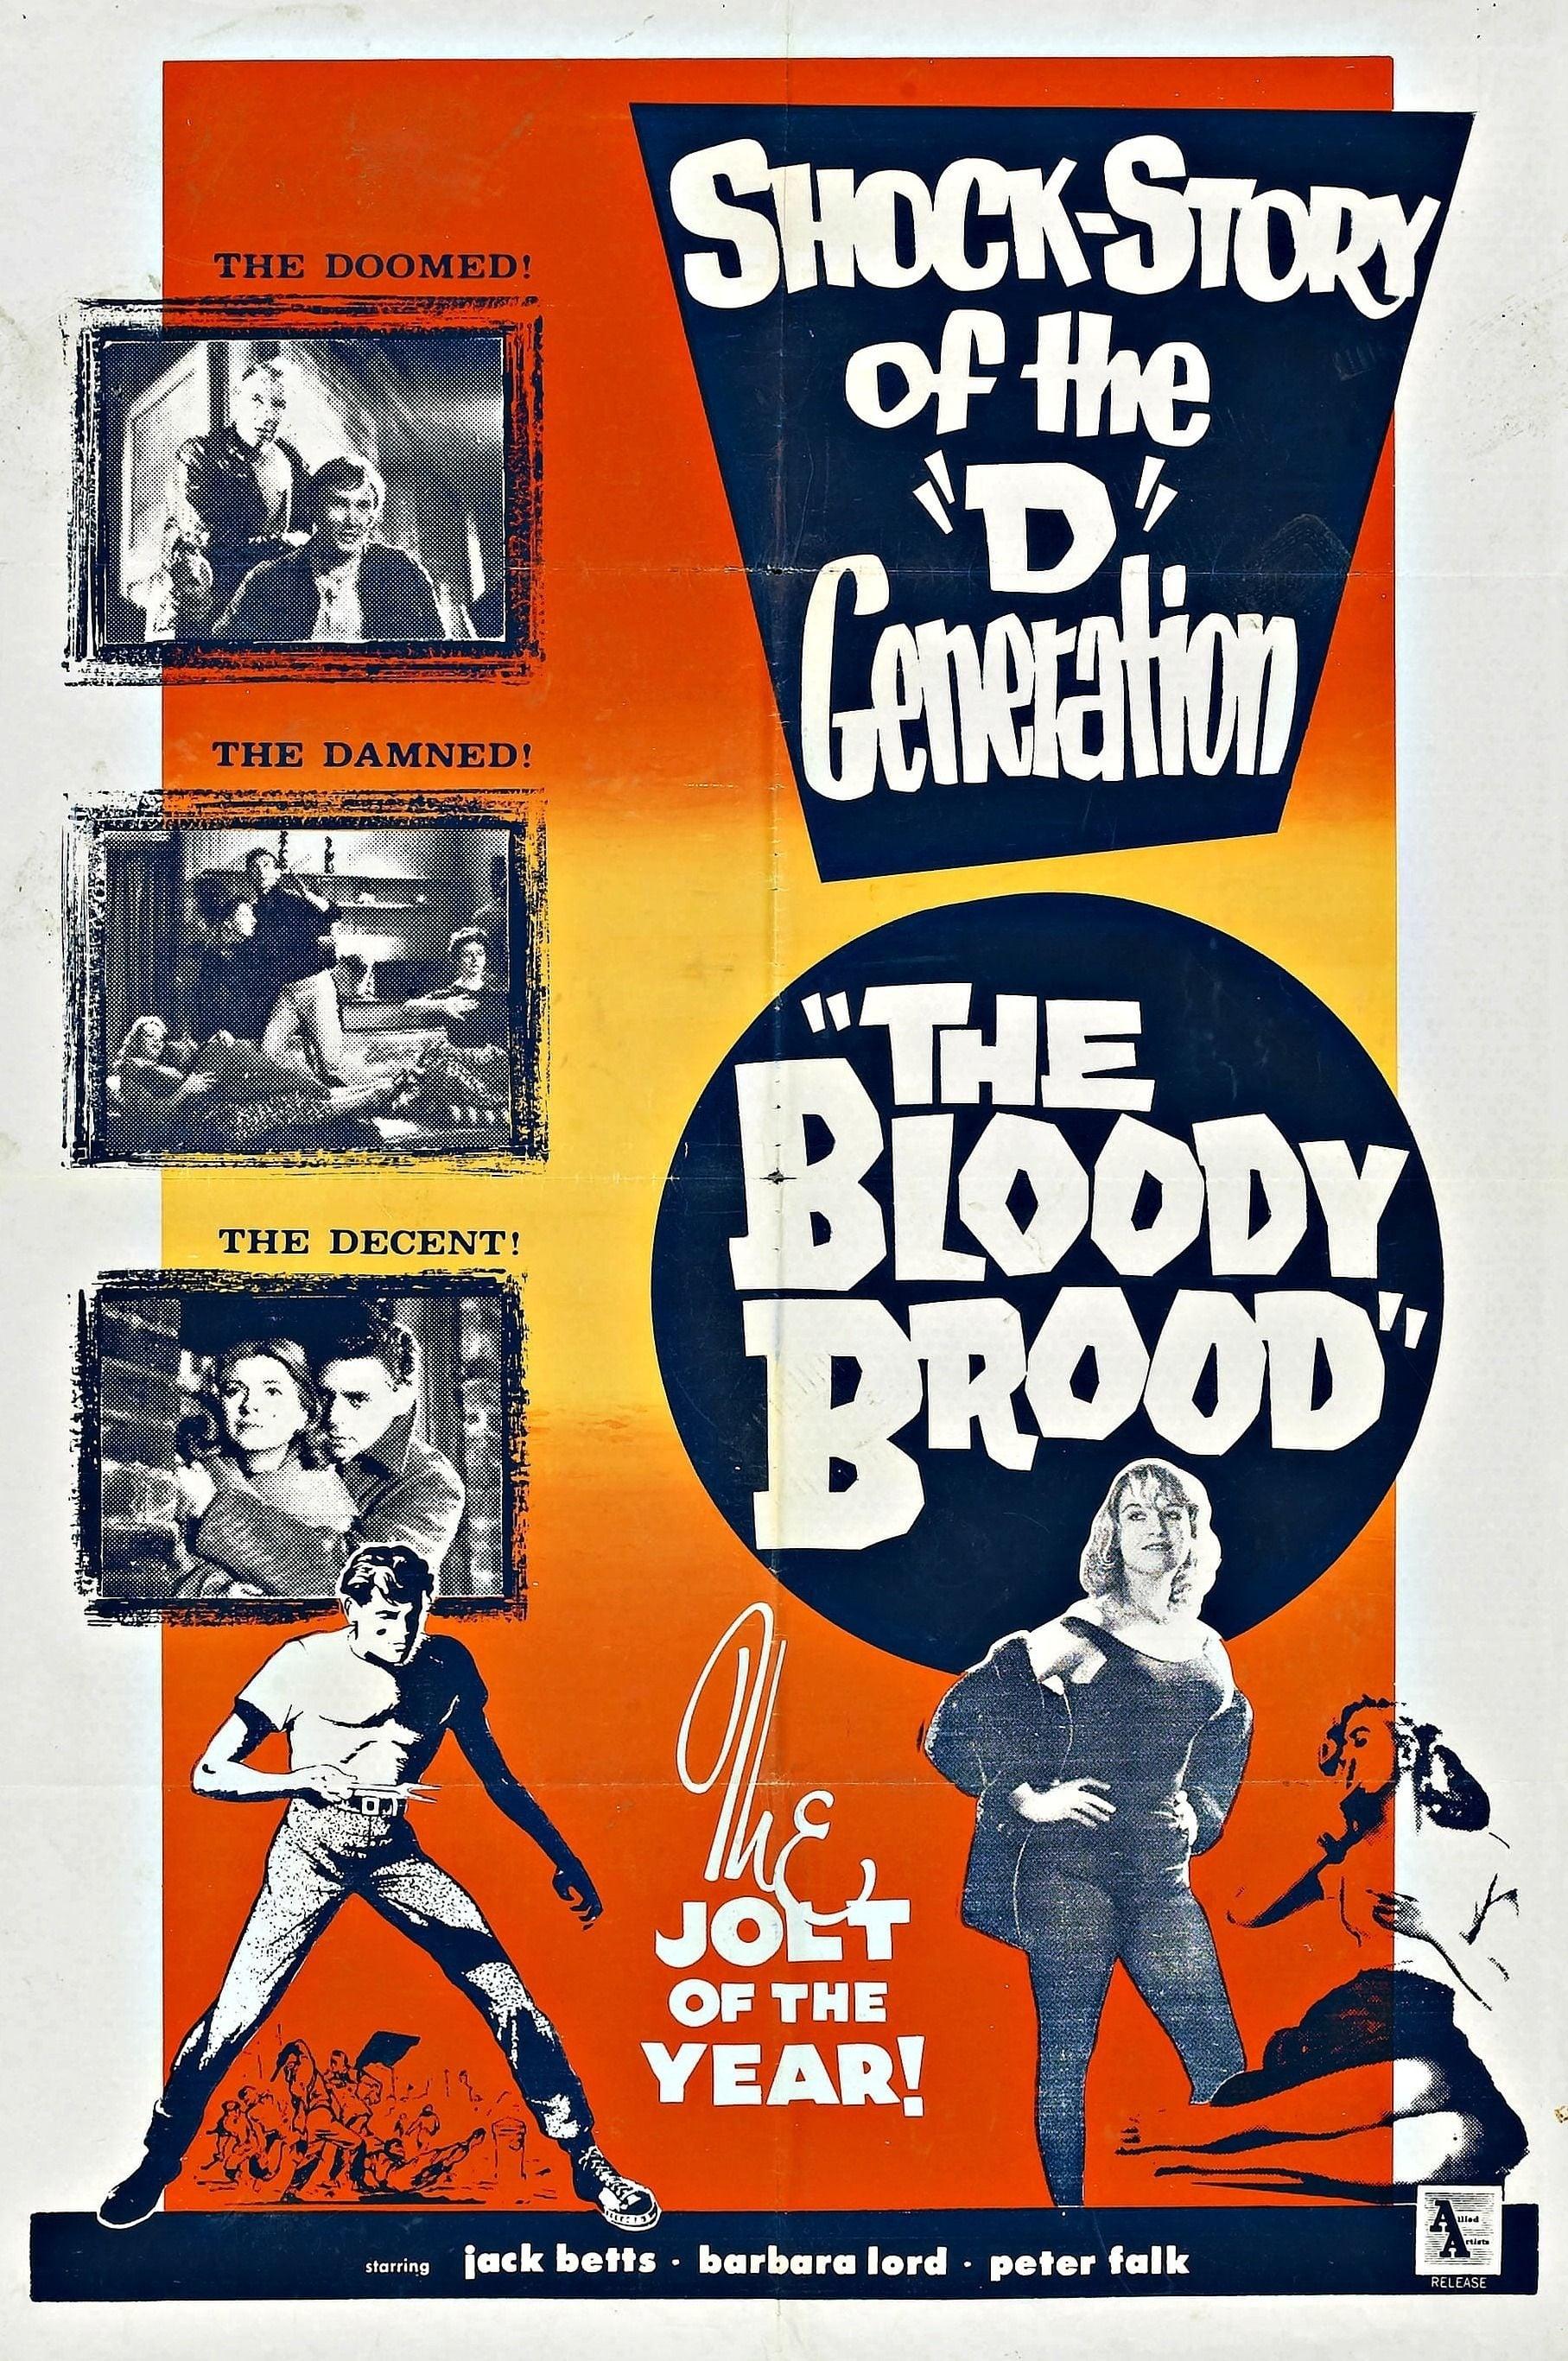 The Bloody Brood poster